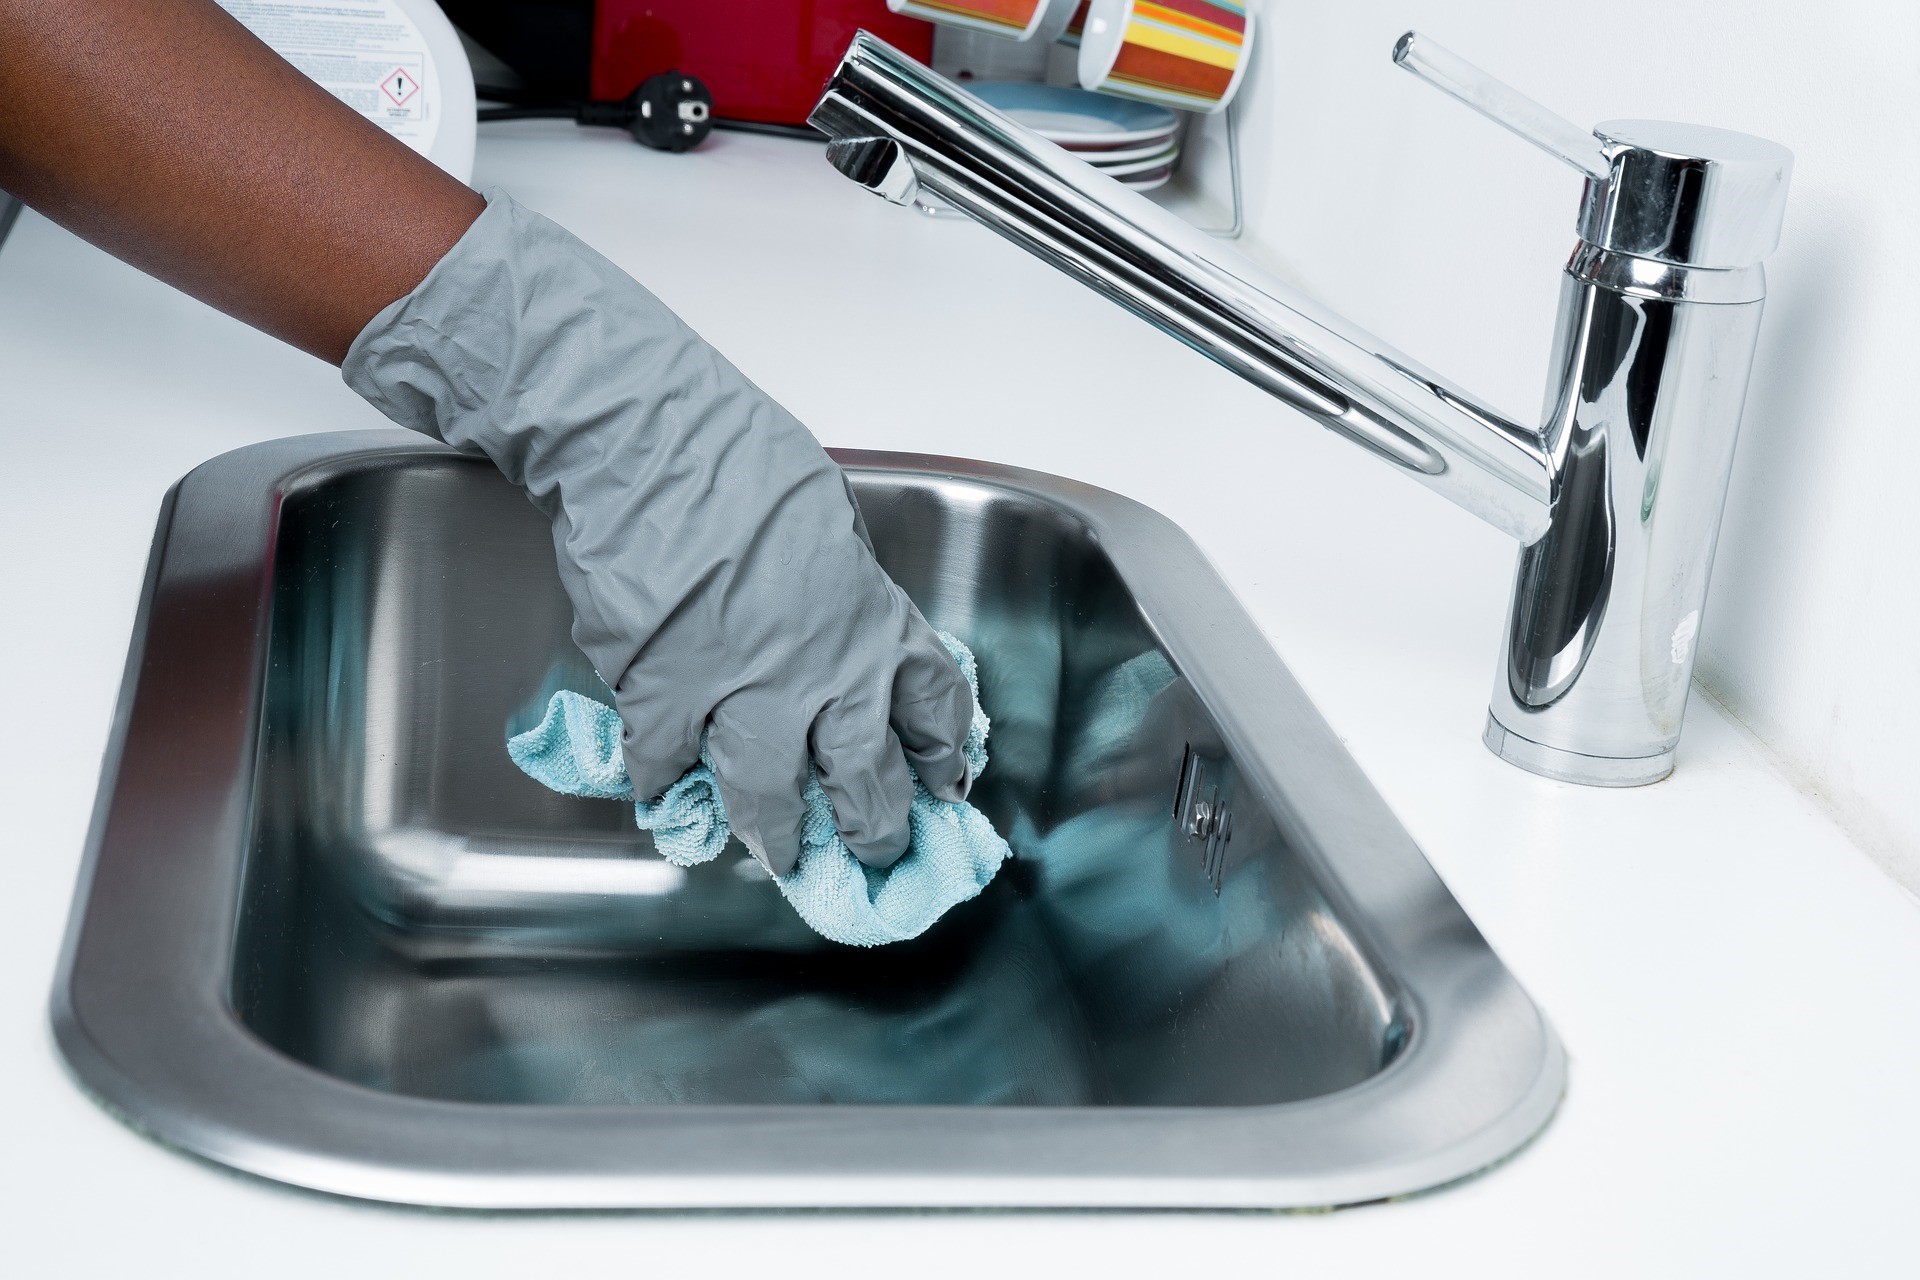 8 Benefits of hiring a cleaning service